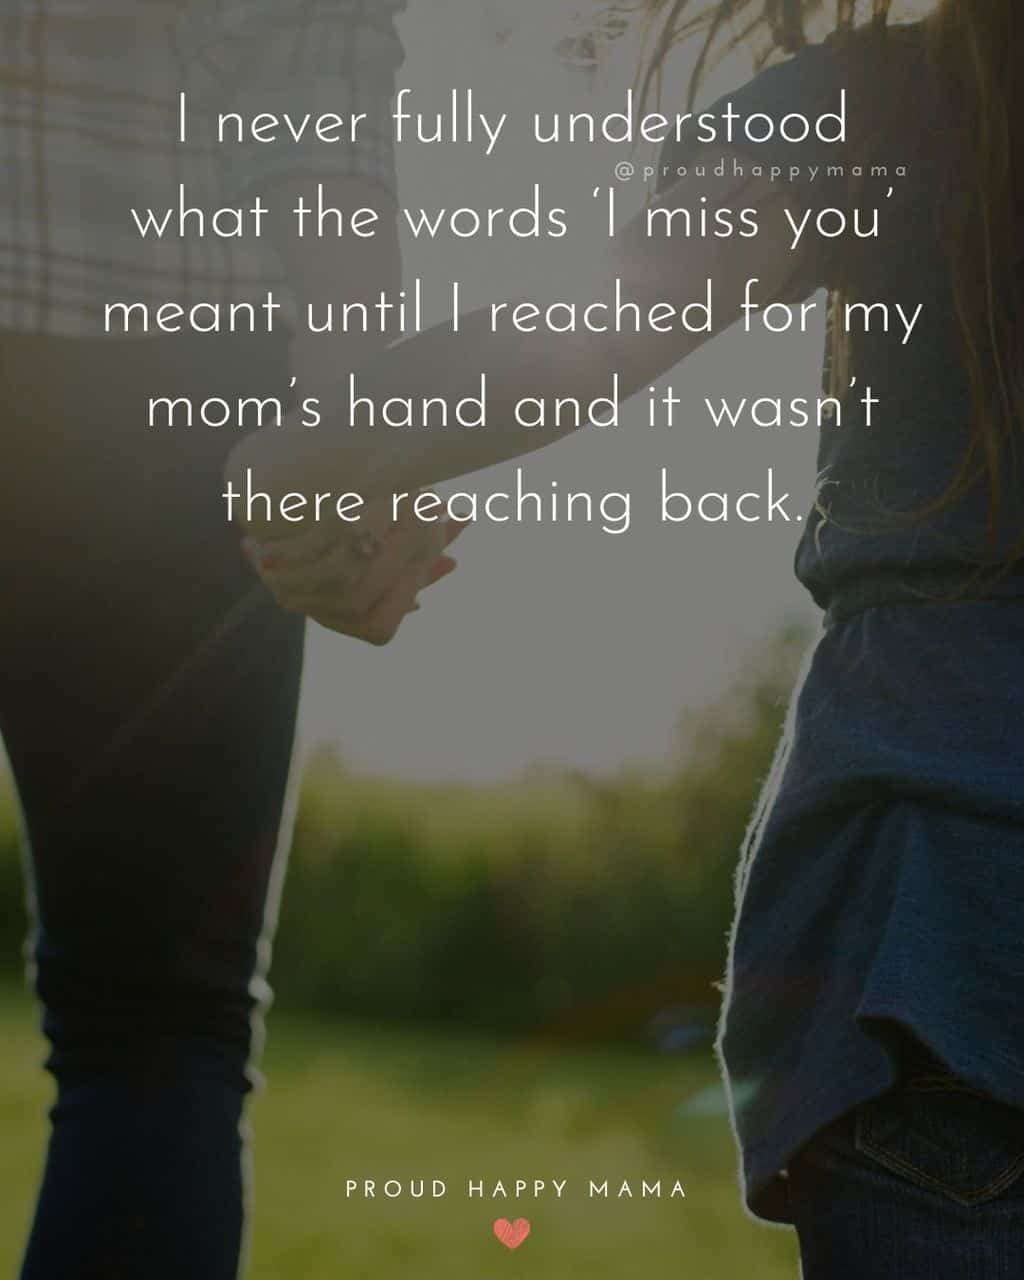 Daughter holding mother's hand walking away from the camera with missing mom quotes text overlay. 'I never fully understood what the words I miss you meant until I reached for my moms hand and it wasn't there reaching back.'